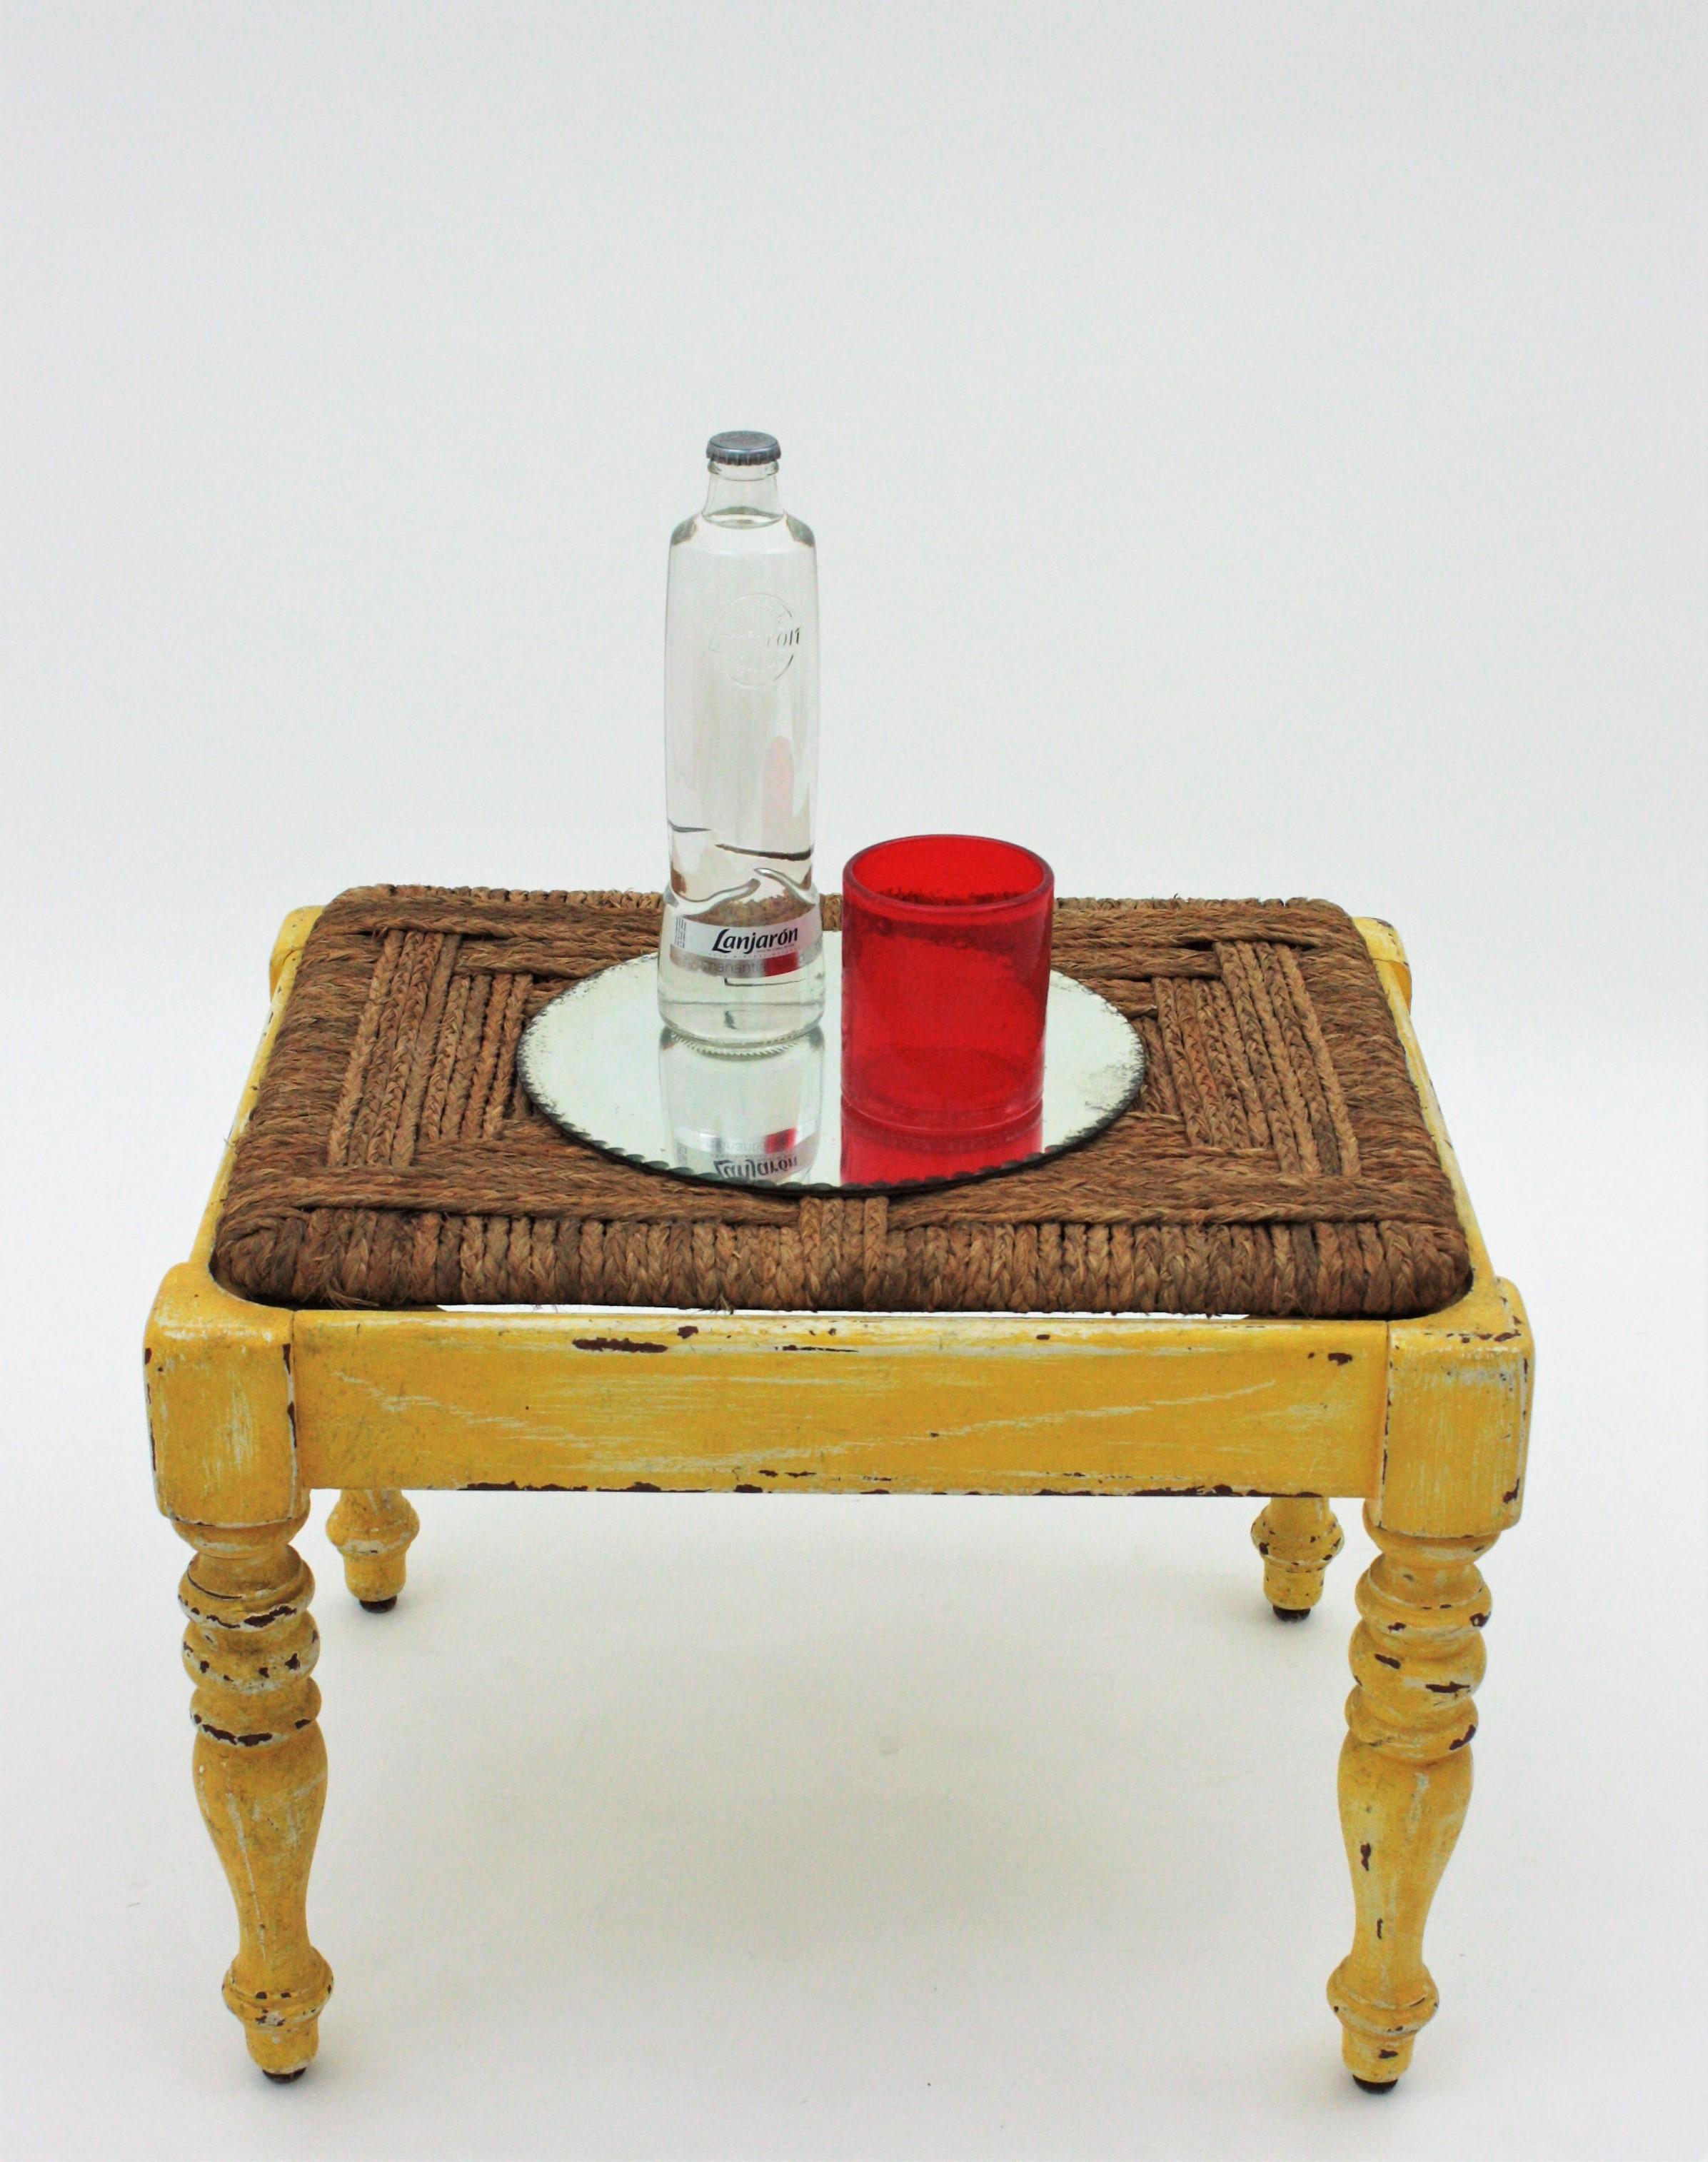 One of a kind turned wood stool in yellow patina with straw esparto grass woven seat, France, 1930s.
This rustic stool has a wooden structure with turned legs and an aged distressed patina in yellow and white. The seat is made with hand braided